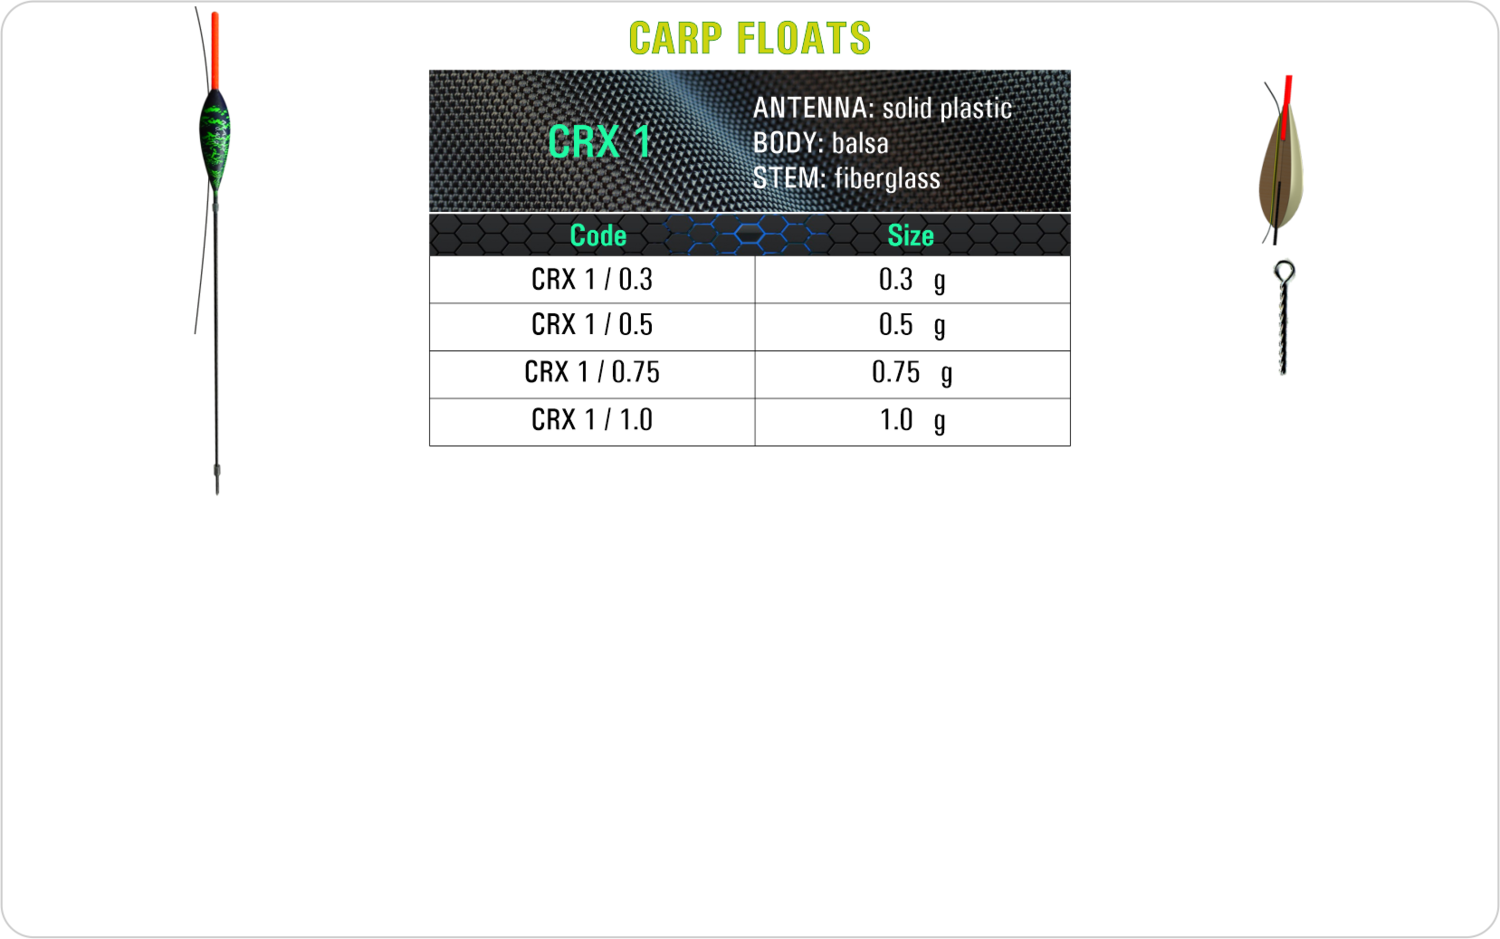 SF CRX 1 Carp float model and table containing an additional information about this float with different codes, sizes, types of the body, the stem and the antenna of the float.